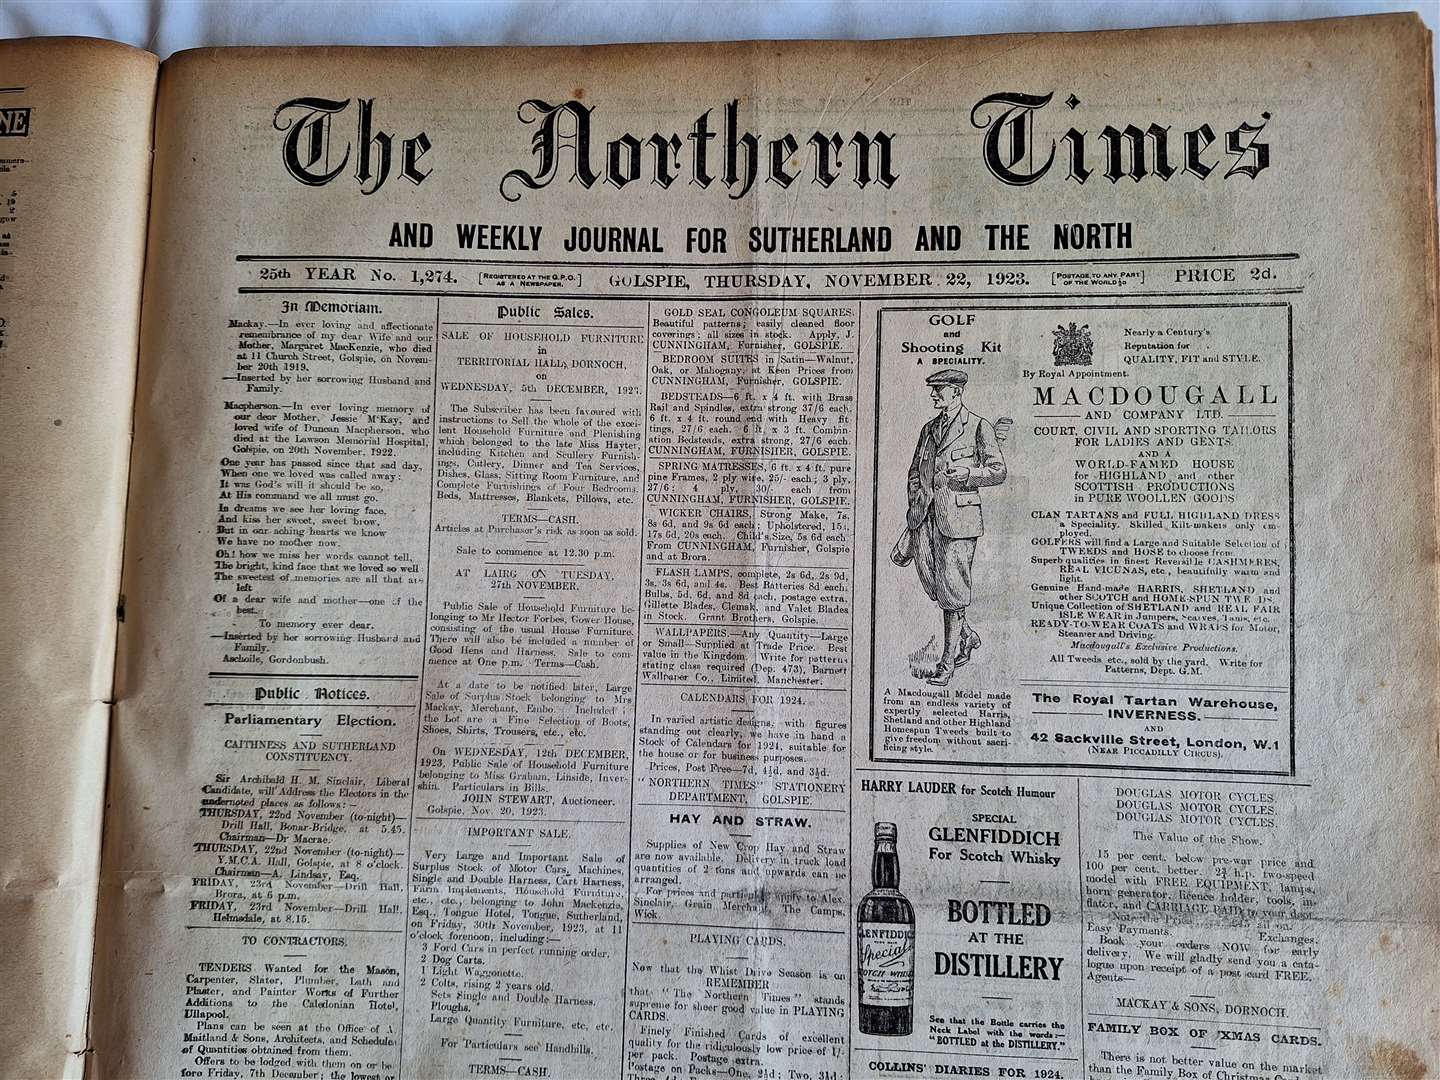 The edition of November 22, 1923.